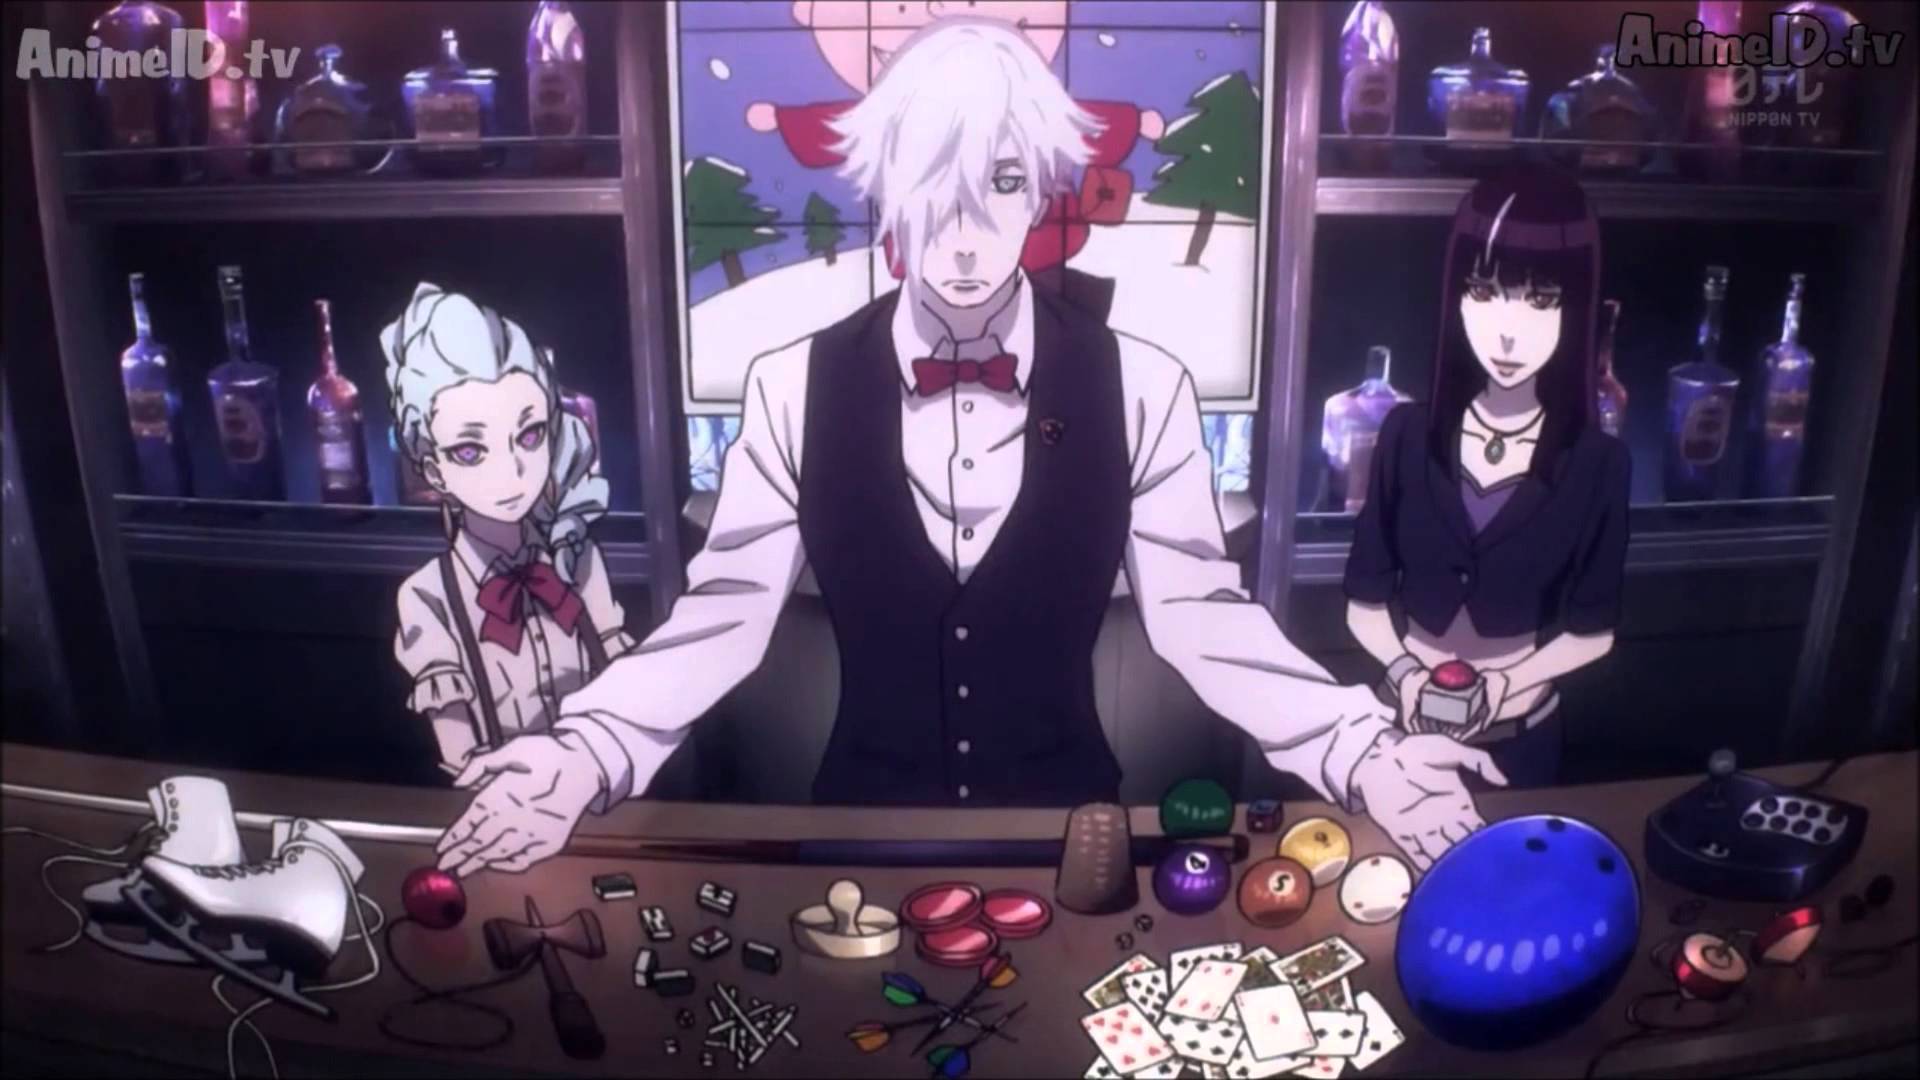 Death parade wallpaper by Miguel0327  Download on ZEDGE  4730